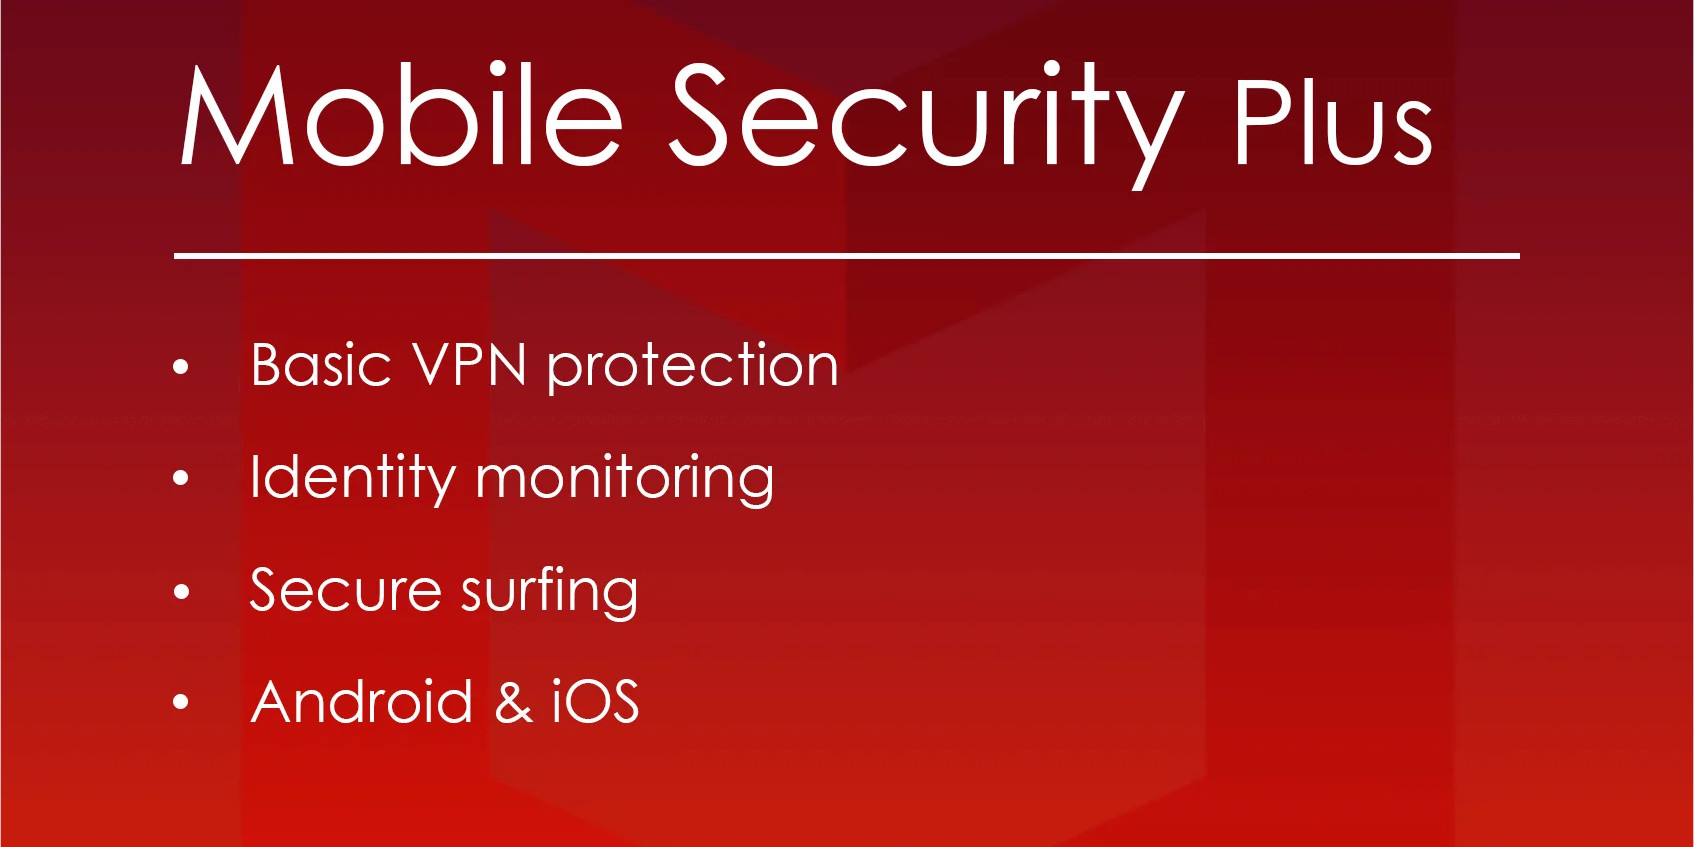 McAfee Mobile Security Plus VPN Key (1 Year / Unlimited Devices), $6.75